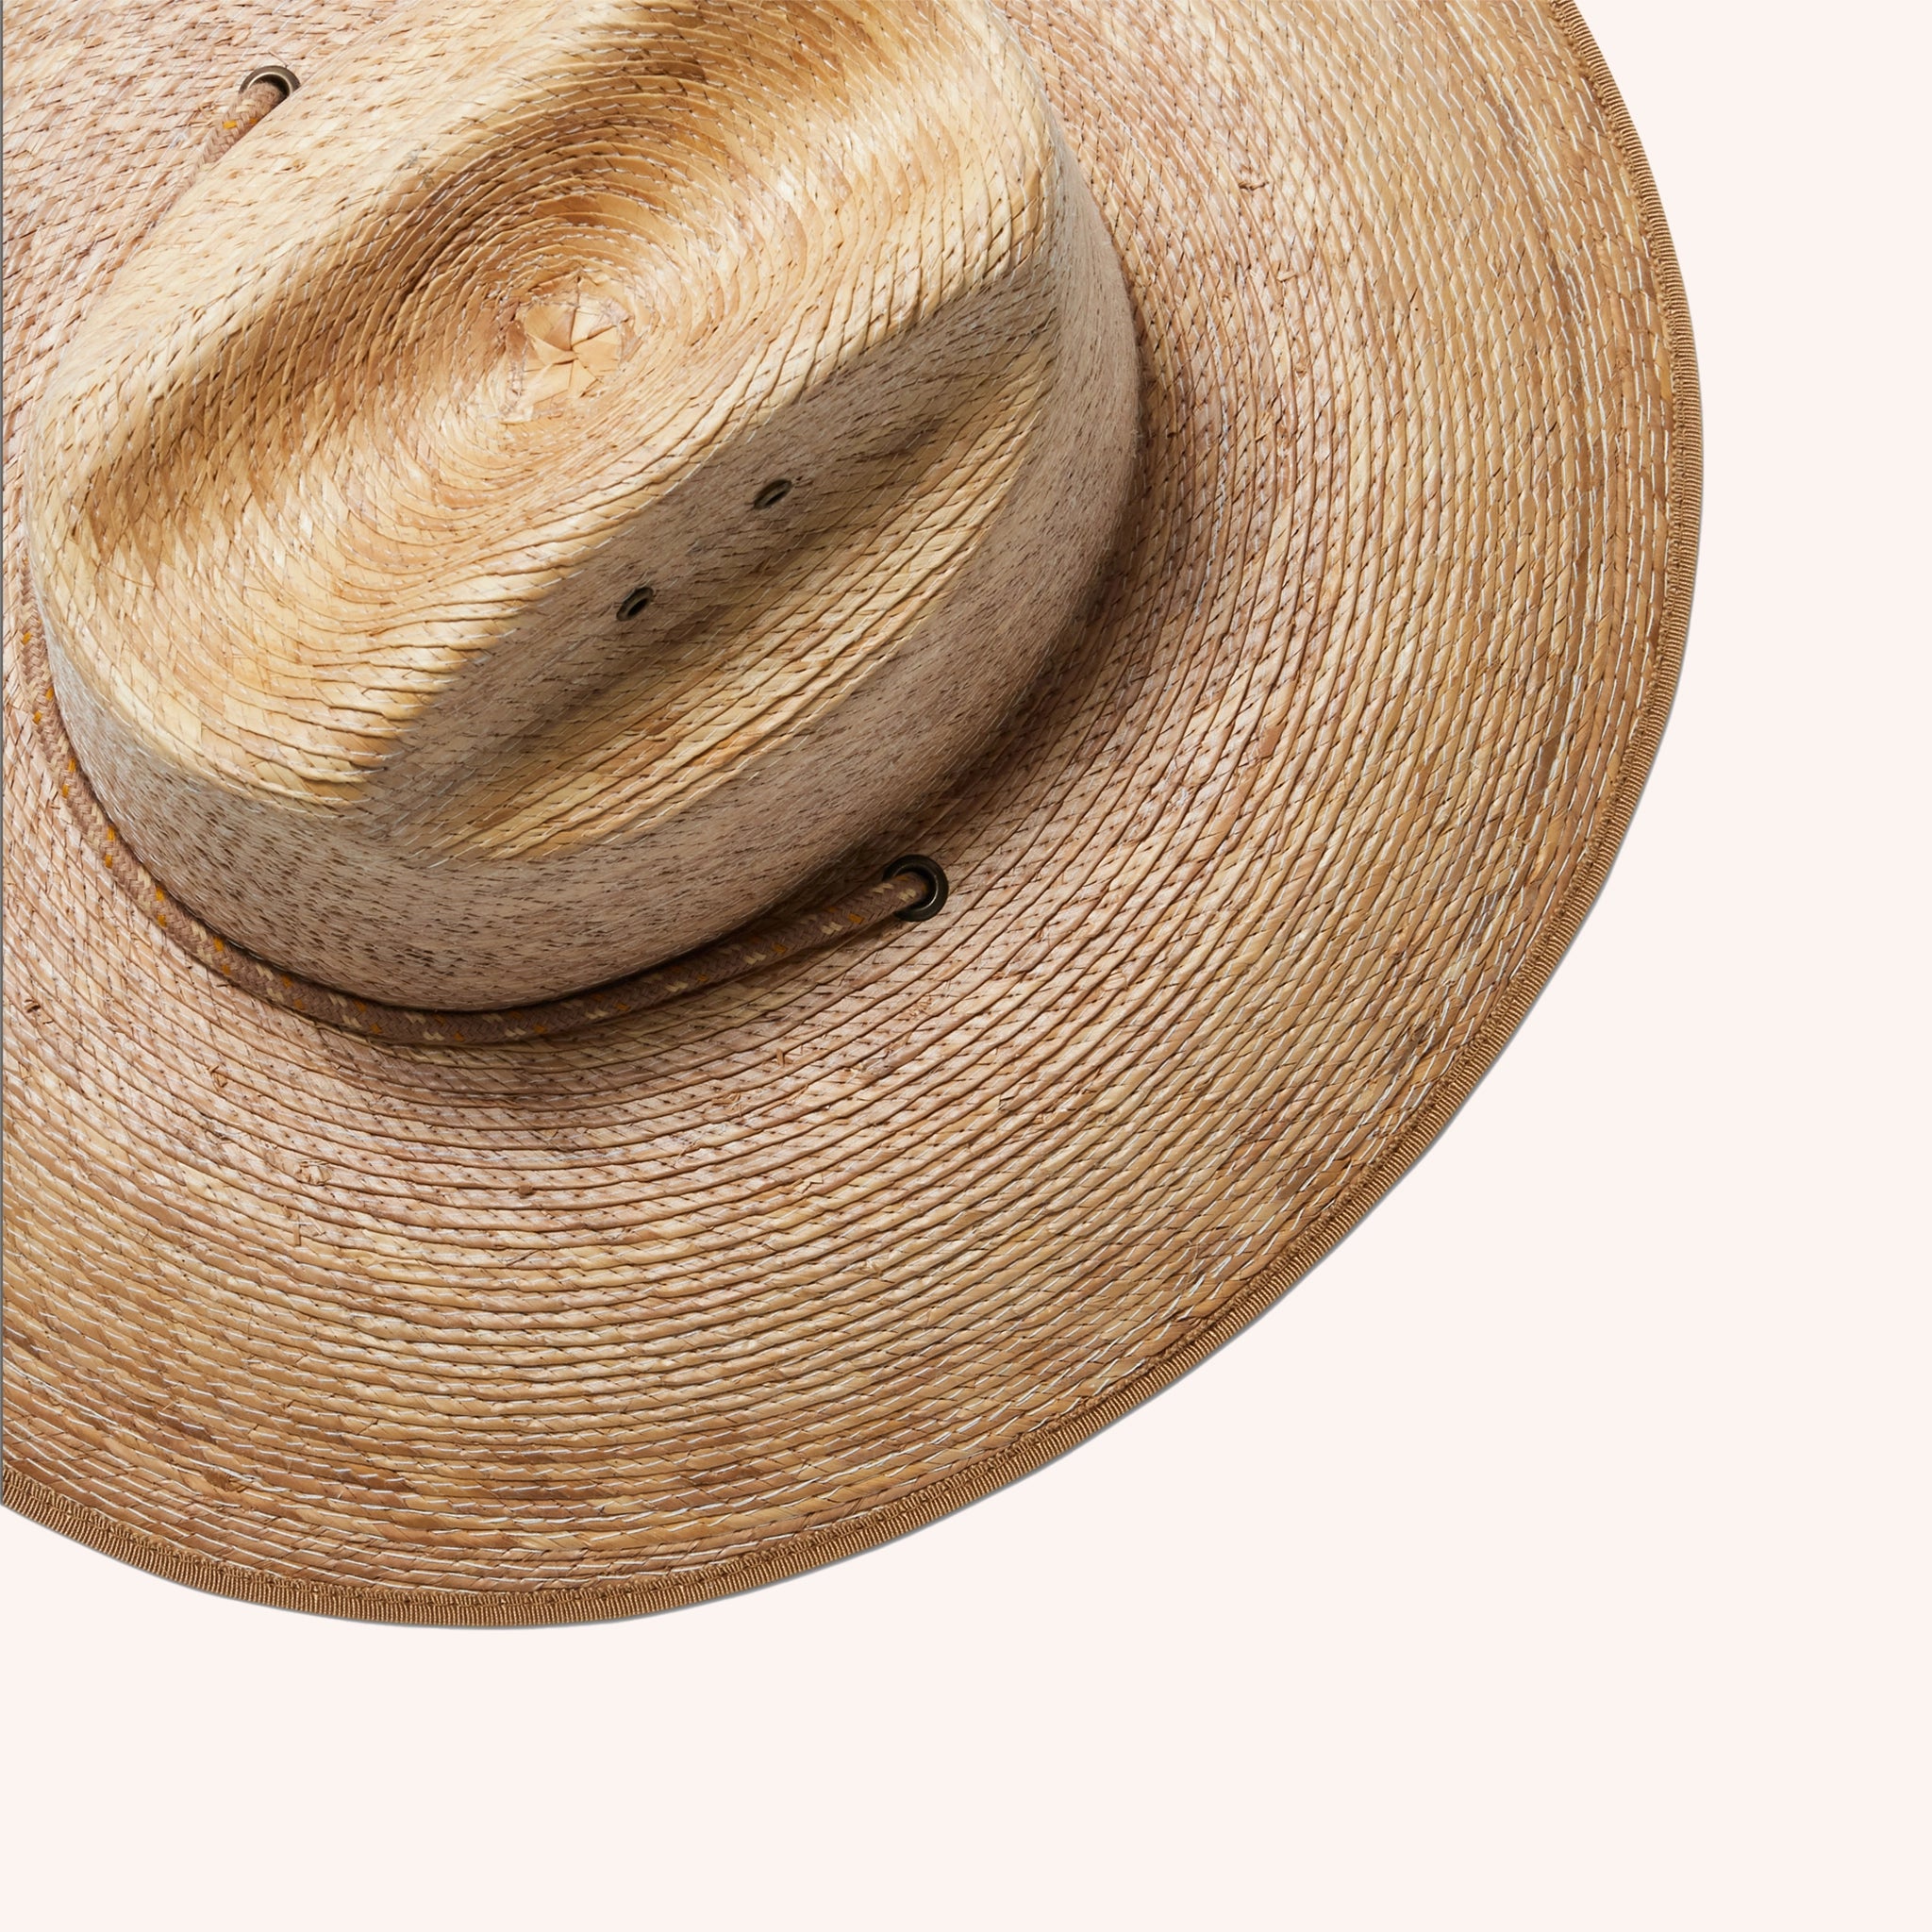 A darker brown straw sun hat with a wide curved brim and a drawstring.